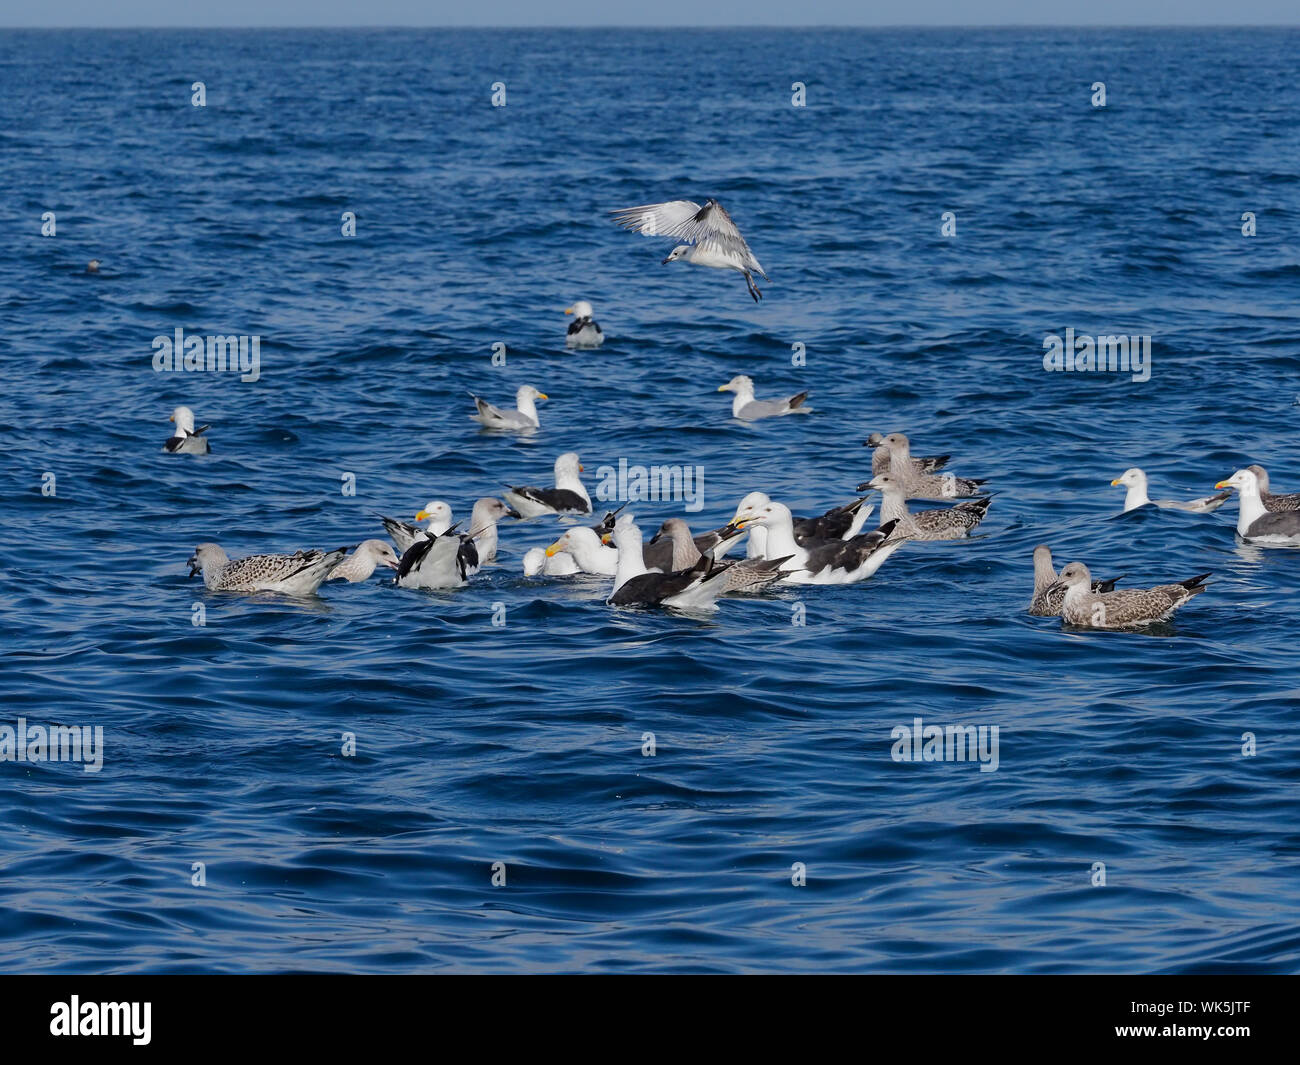 Great black-backed gull, Larus marinus, mixed gulls in water, Near Skokholm, Wales, August 2019 Stock Photo